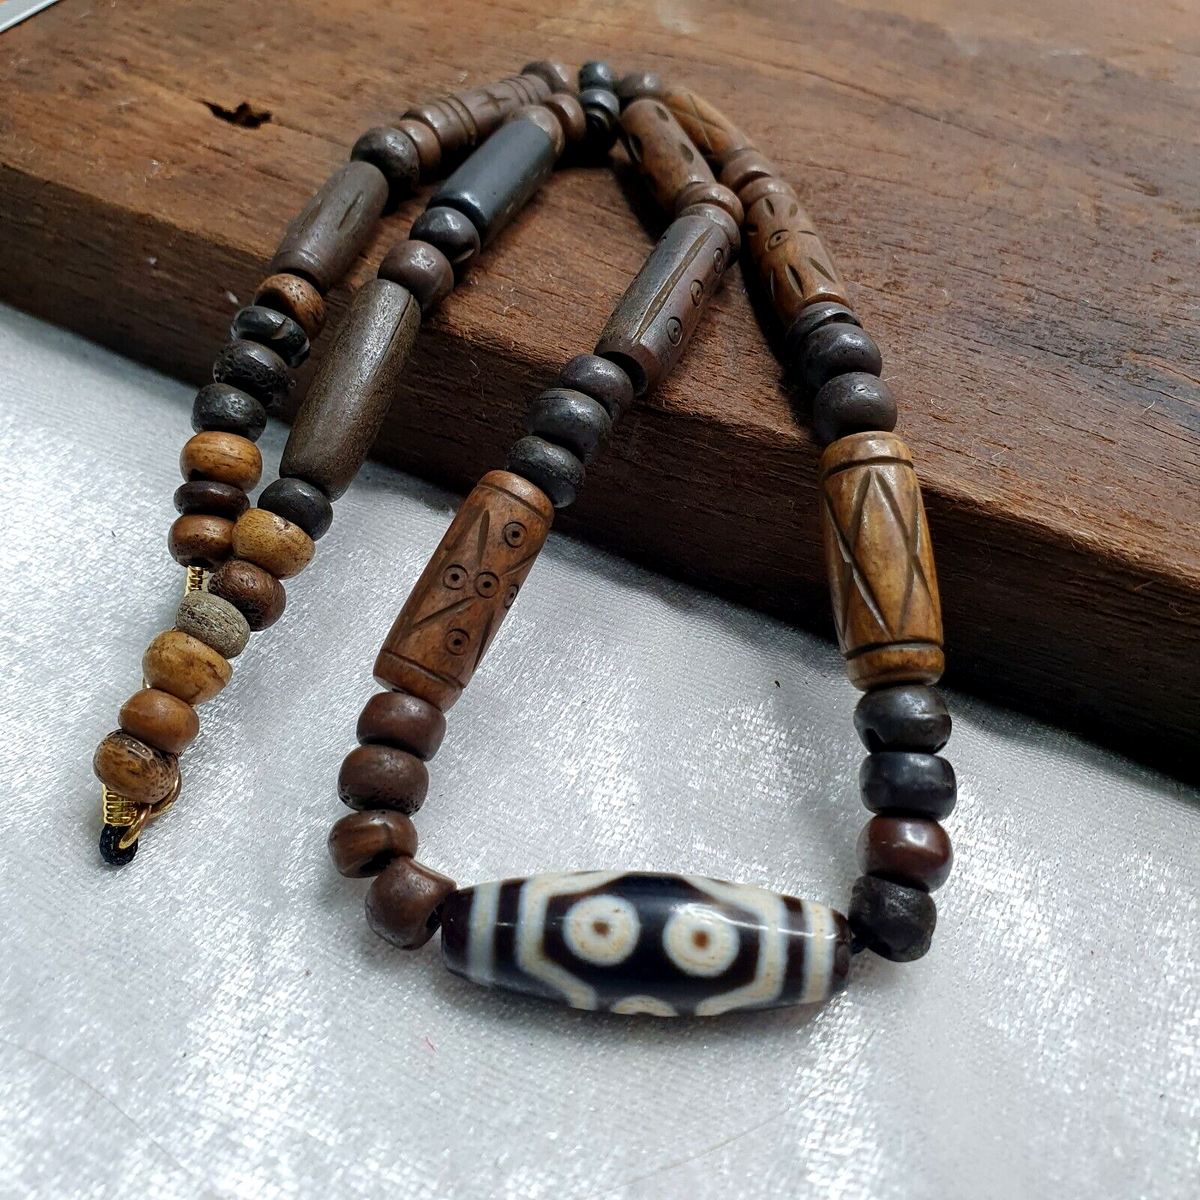 7 eyes Tibetan old Agate amulet with carving Yak Bone Beads Necklace